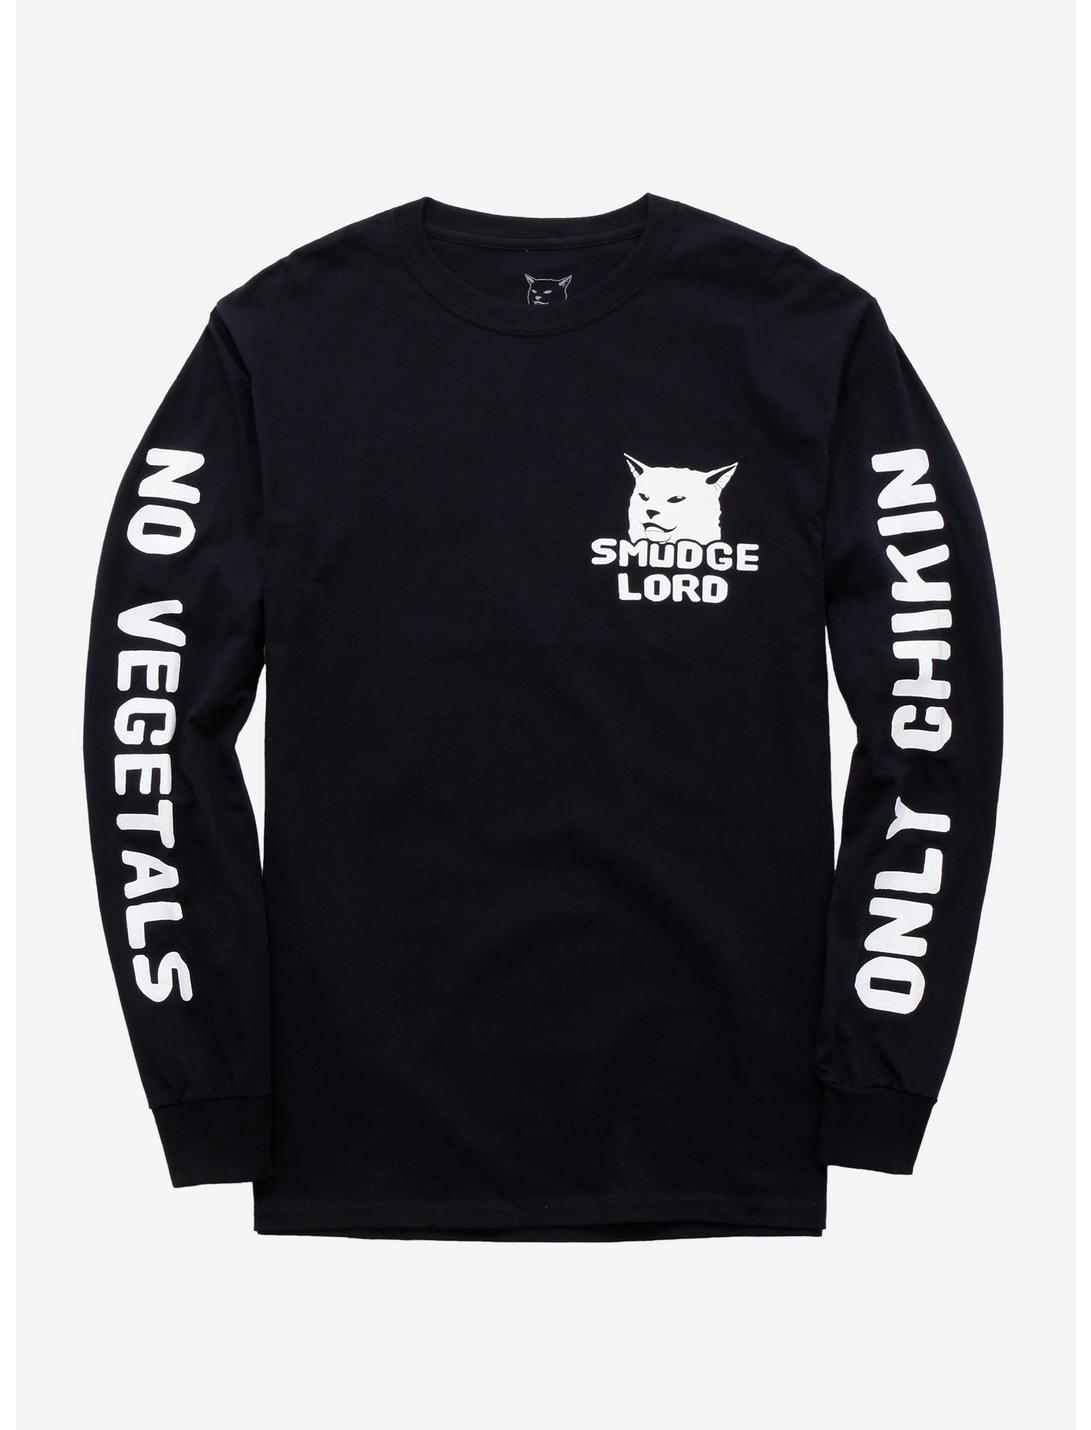 Smudgelord No Vegetals Long-Sleeve T-Shirt, WHITE, hi-res